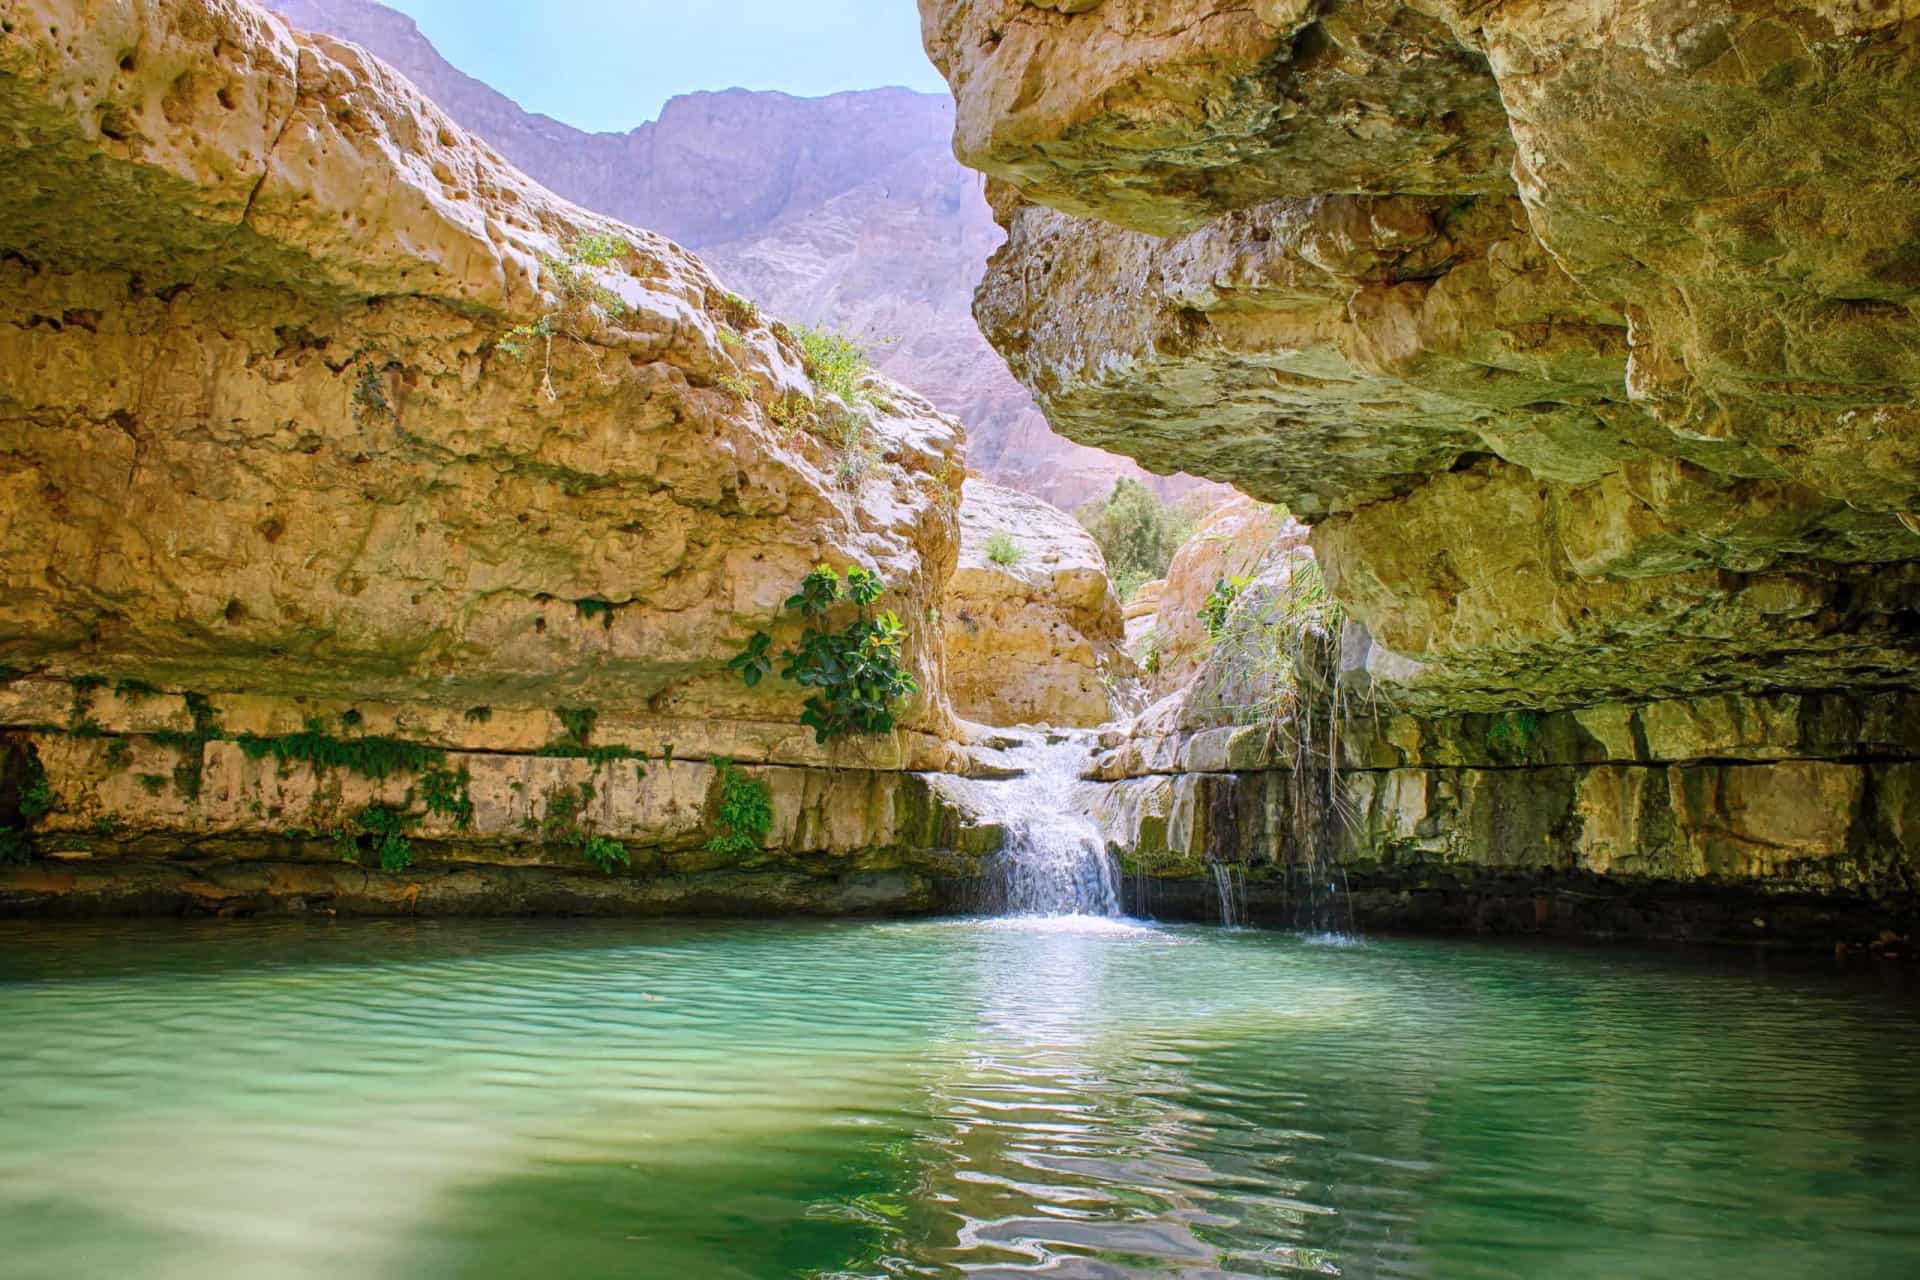 <p>Tranquil Ein Gedi, located west of the Dead Sea, near Masada and the Qumran Caves, is where David hid from King Saul and where he spared his life when he realized Saul was unarmed.</p>